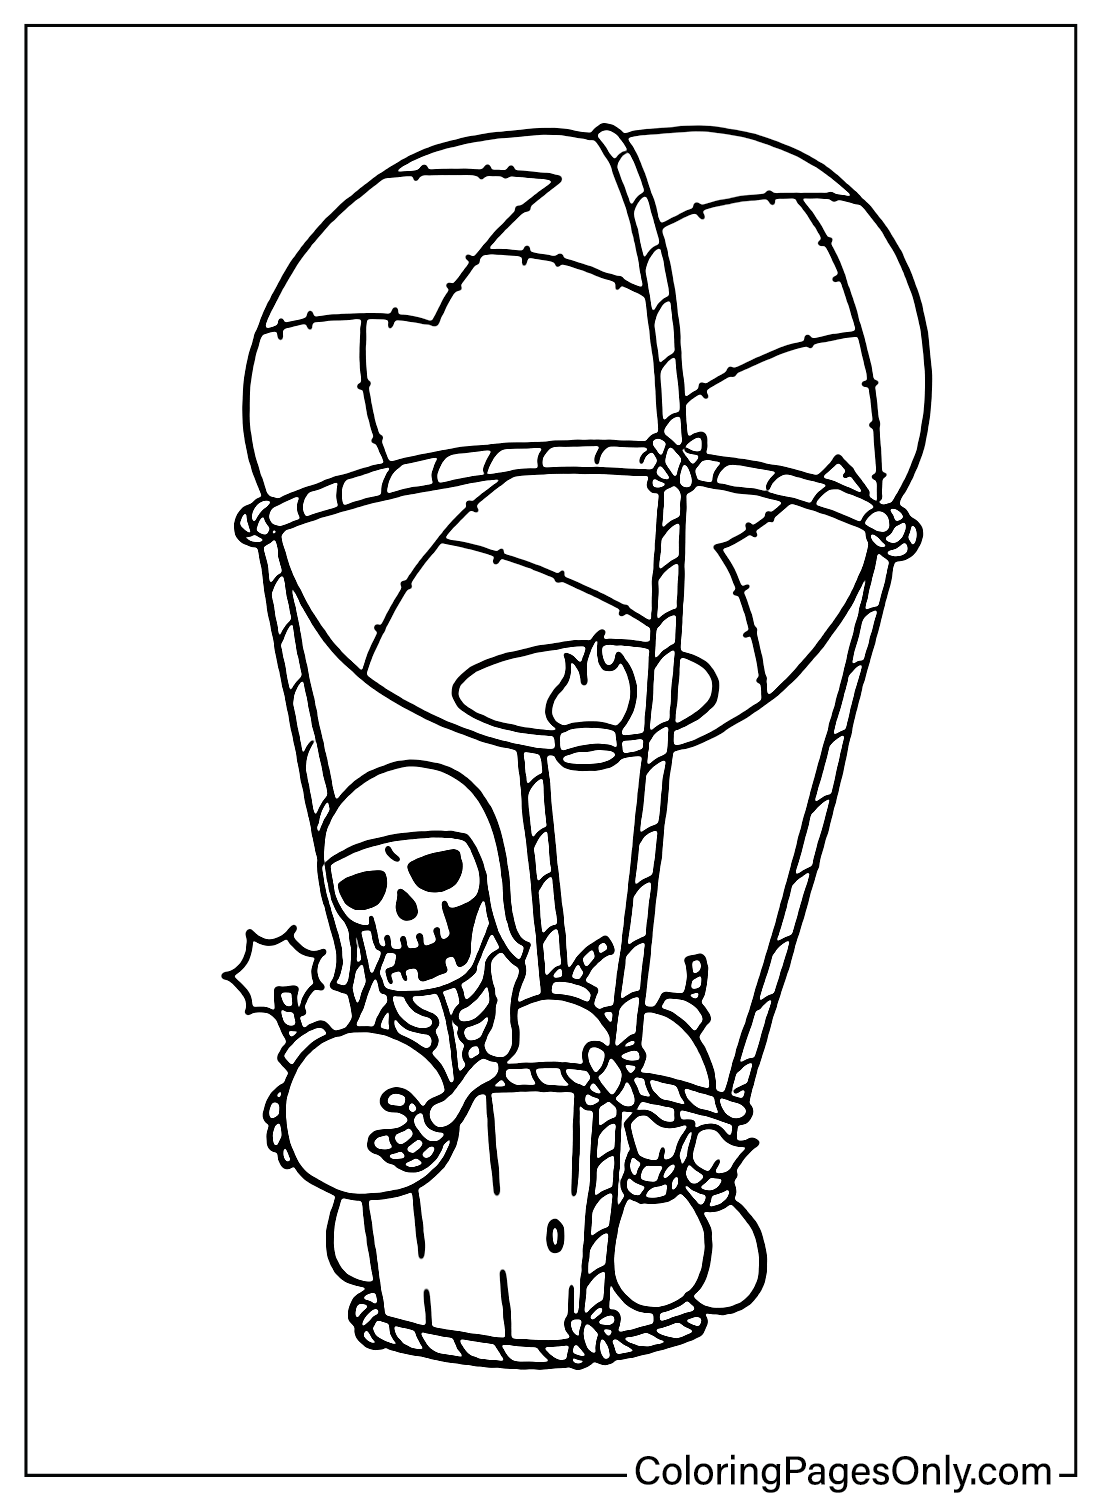 Clash of Clans Balloon Coloring Page from Clash of Clans